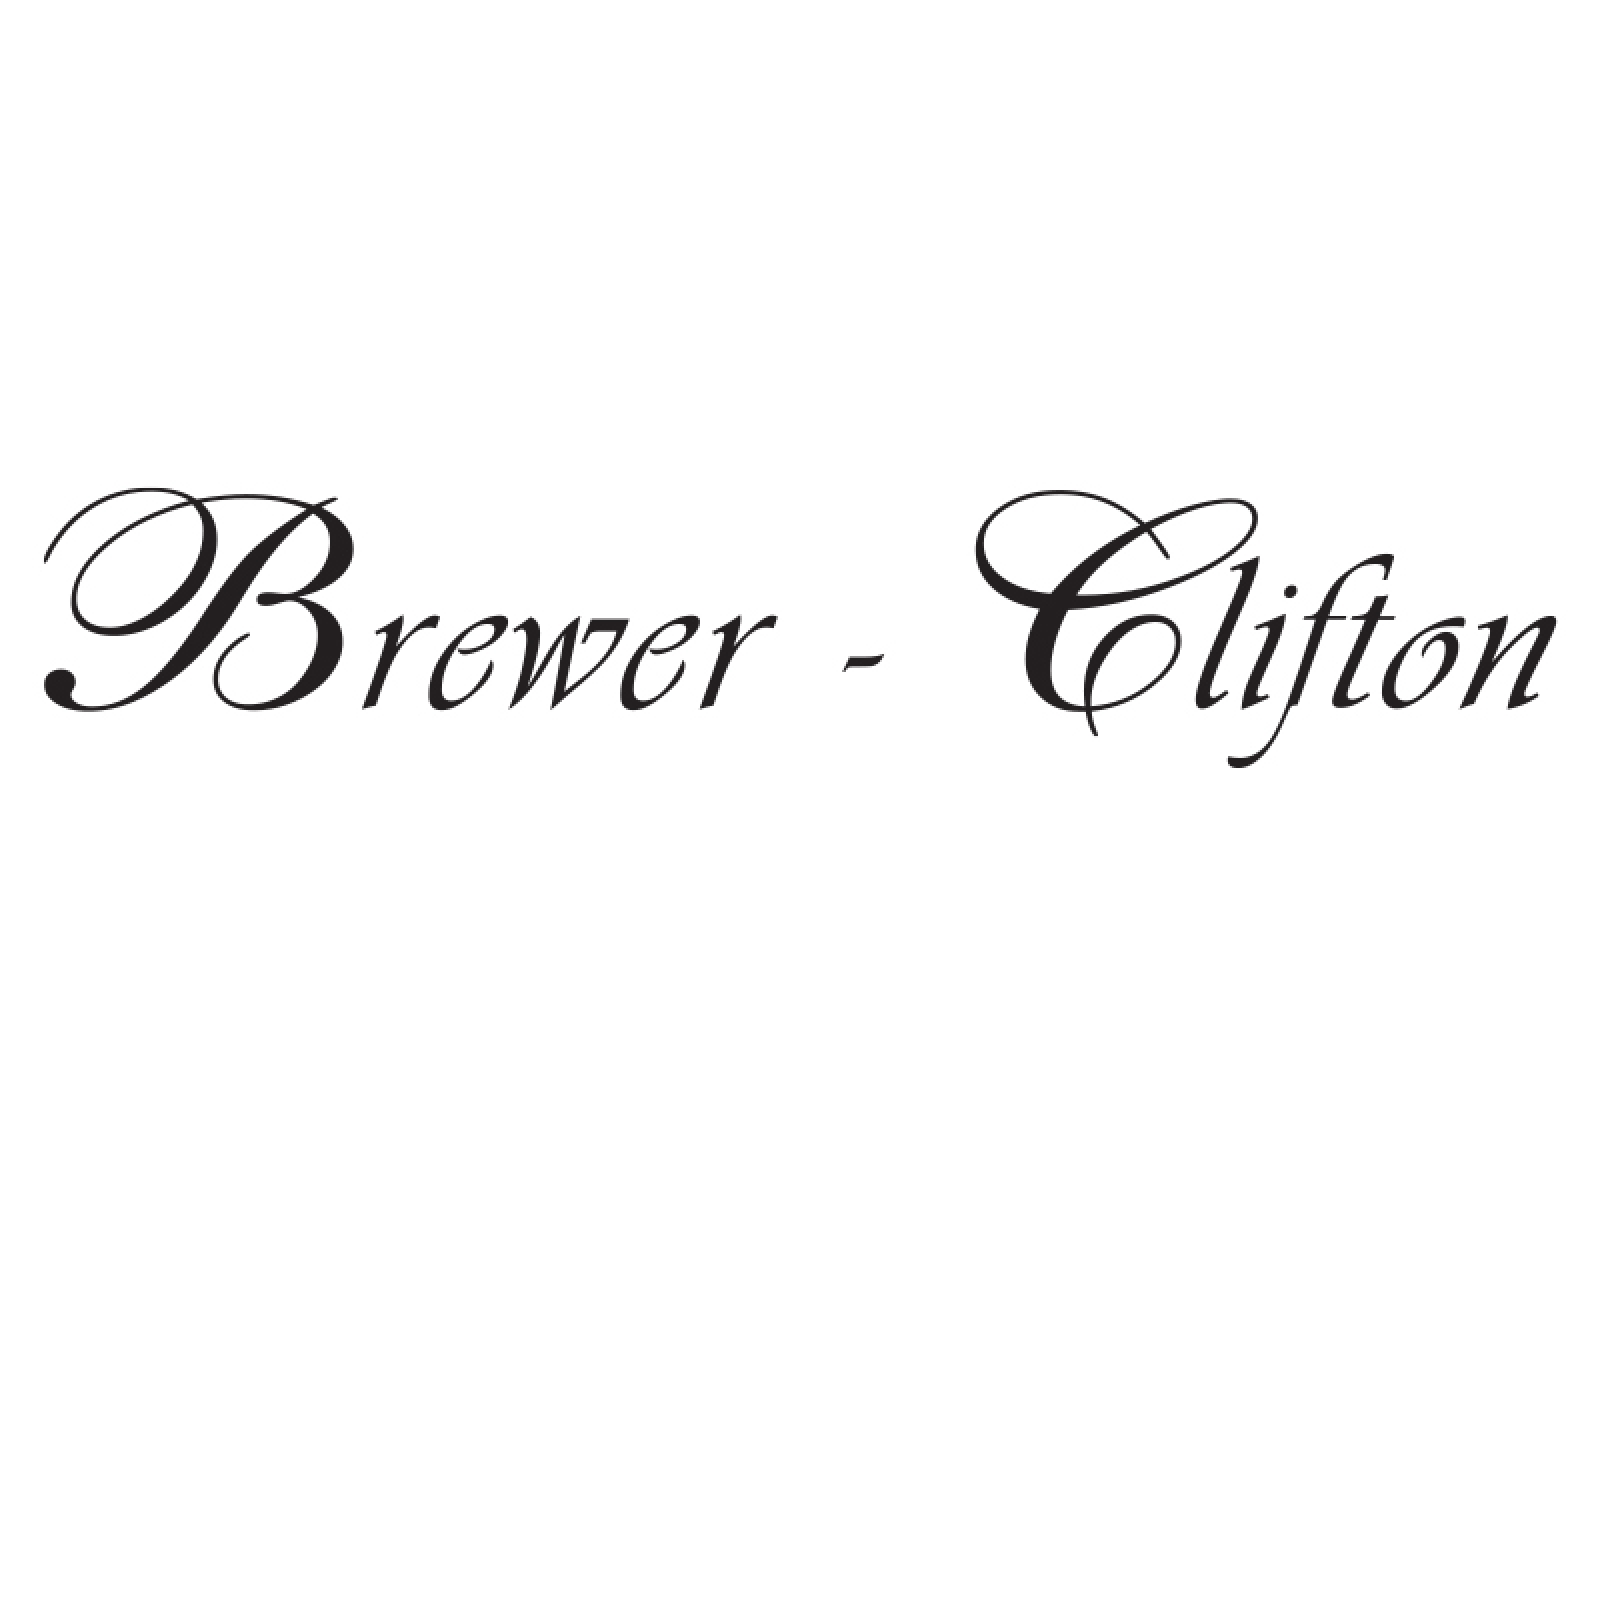 JFW Brewer Clifton Certified Winery 